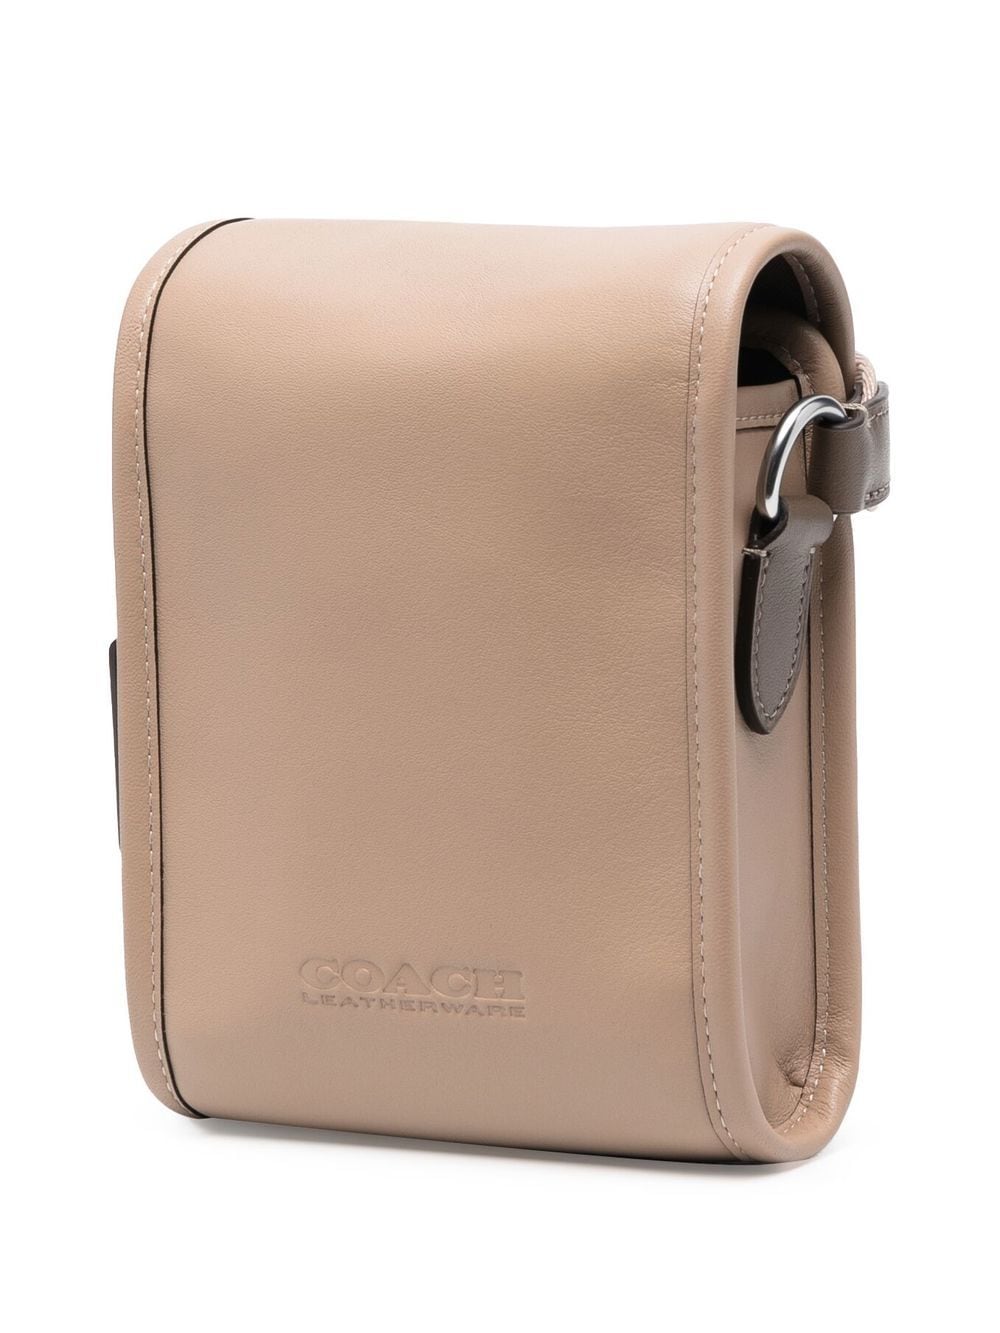 COACH Charter North/South Leather Crossbody Bag